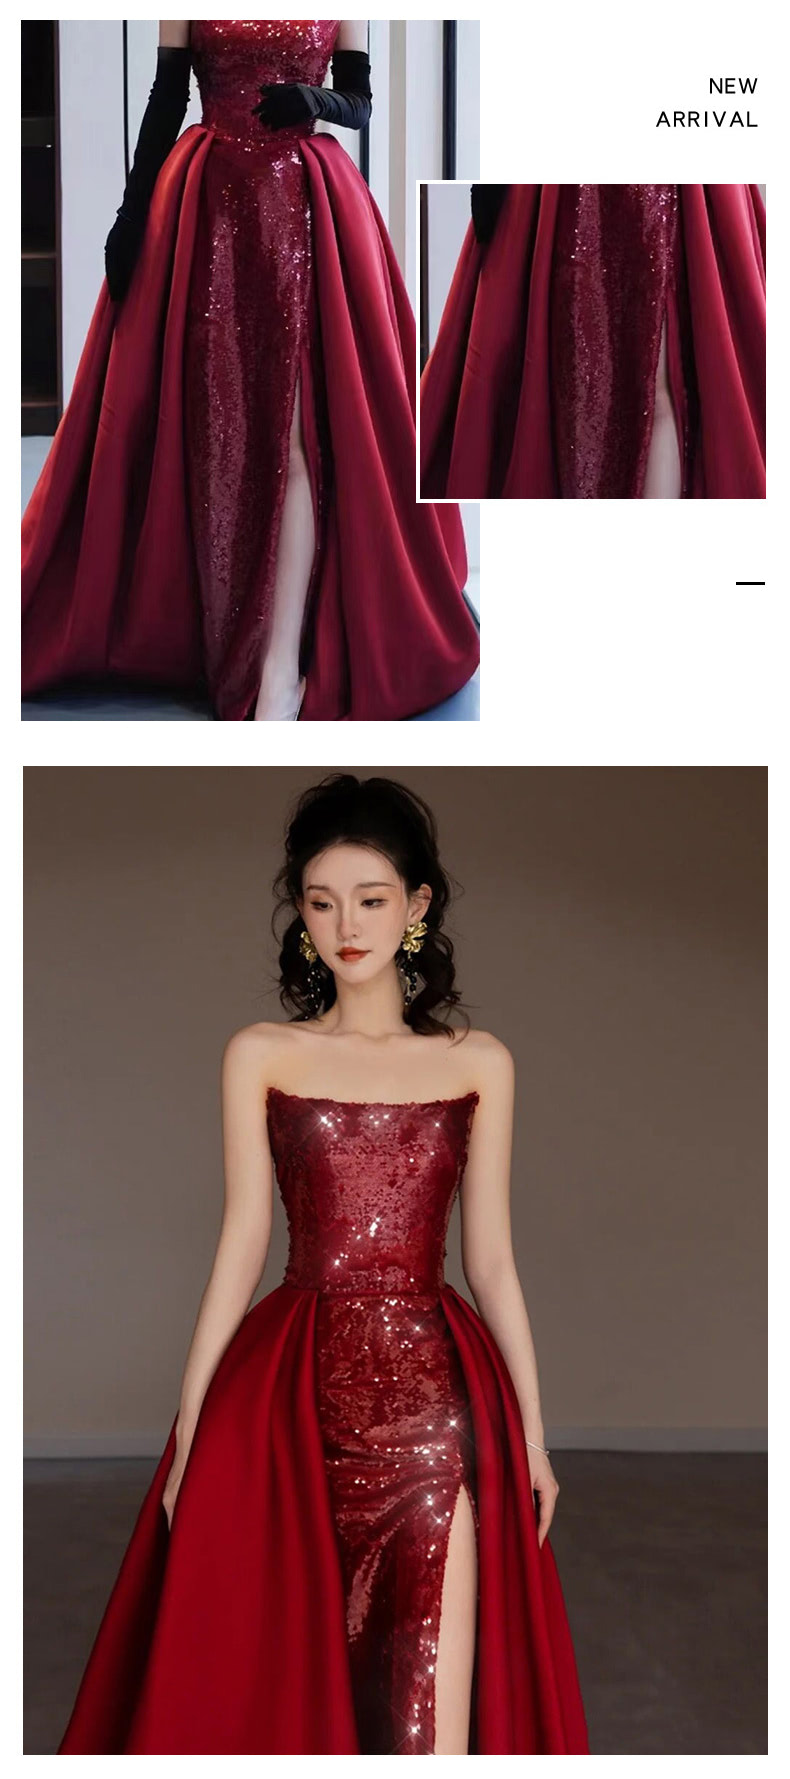 Chic-Red-Sleeveless-Tube-Top-Banquet-Toast-Formal-Evening-Party-Dress09